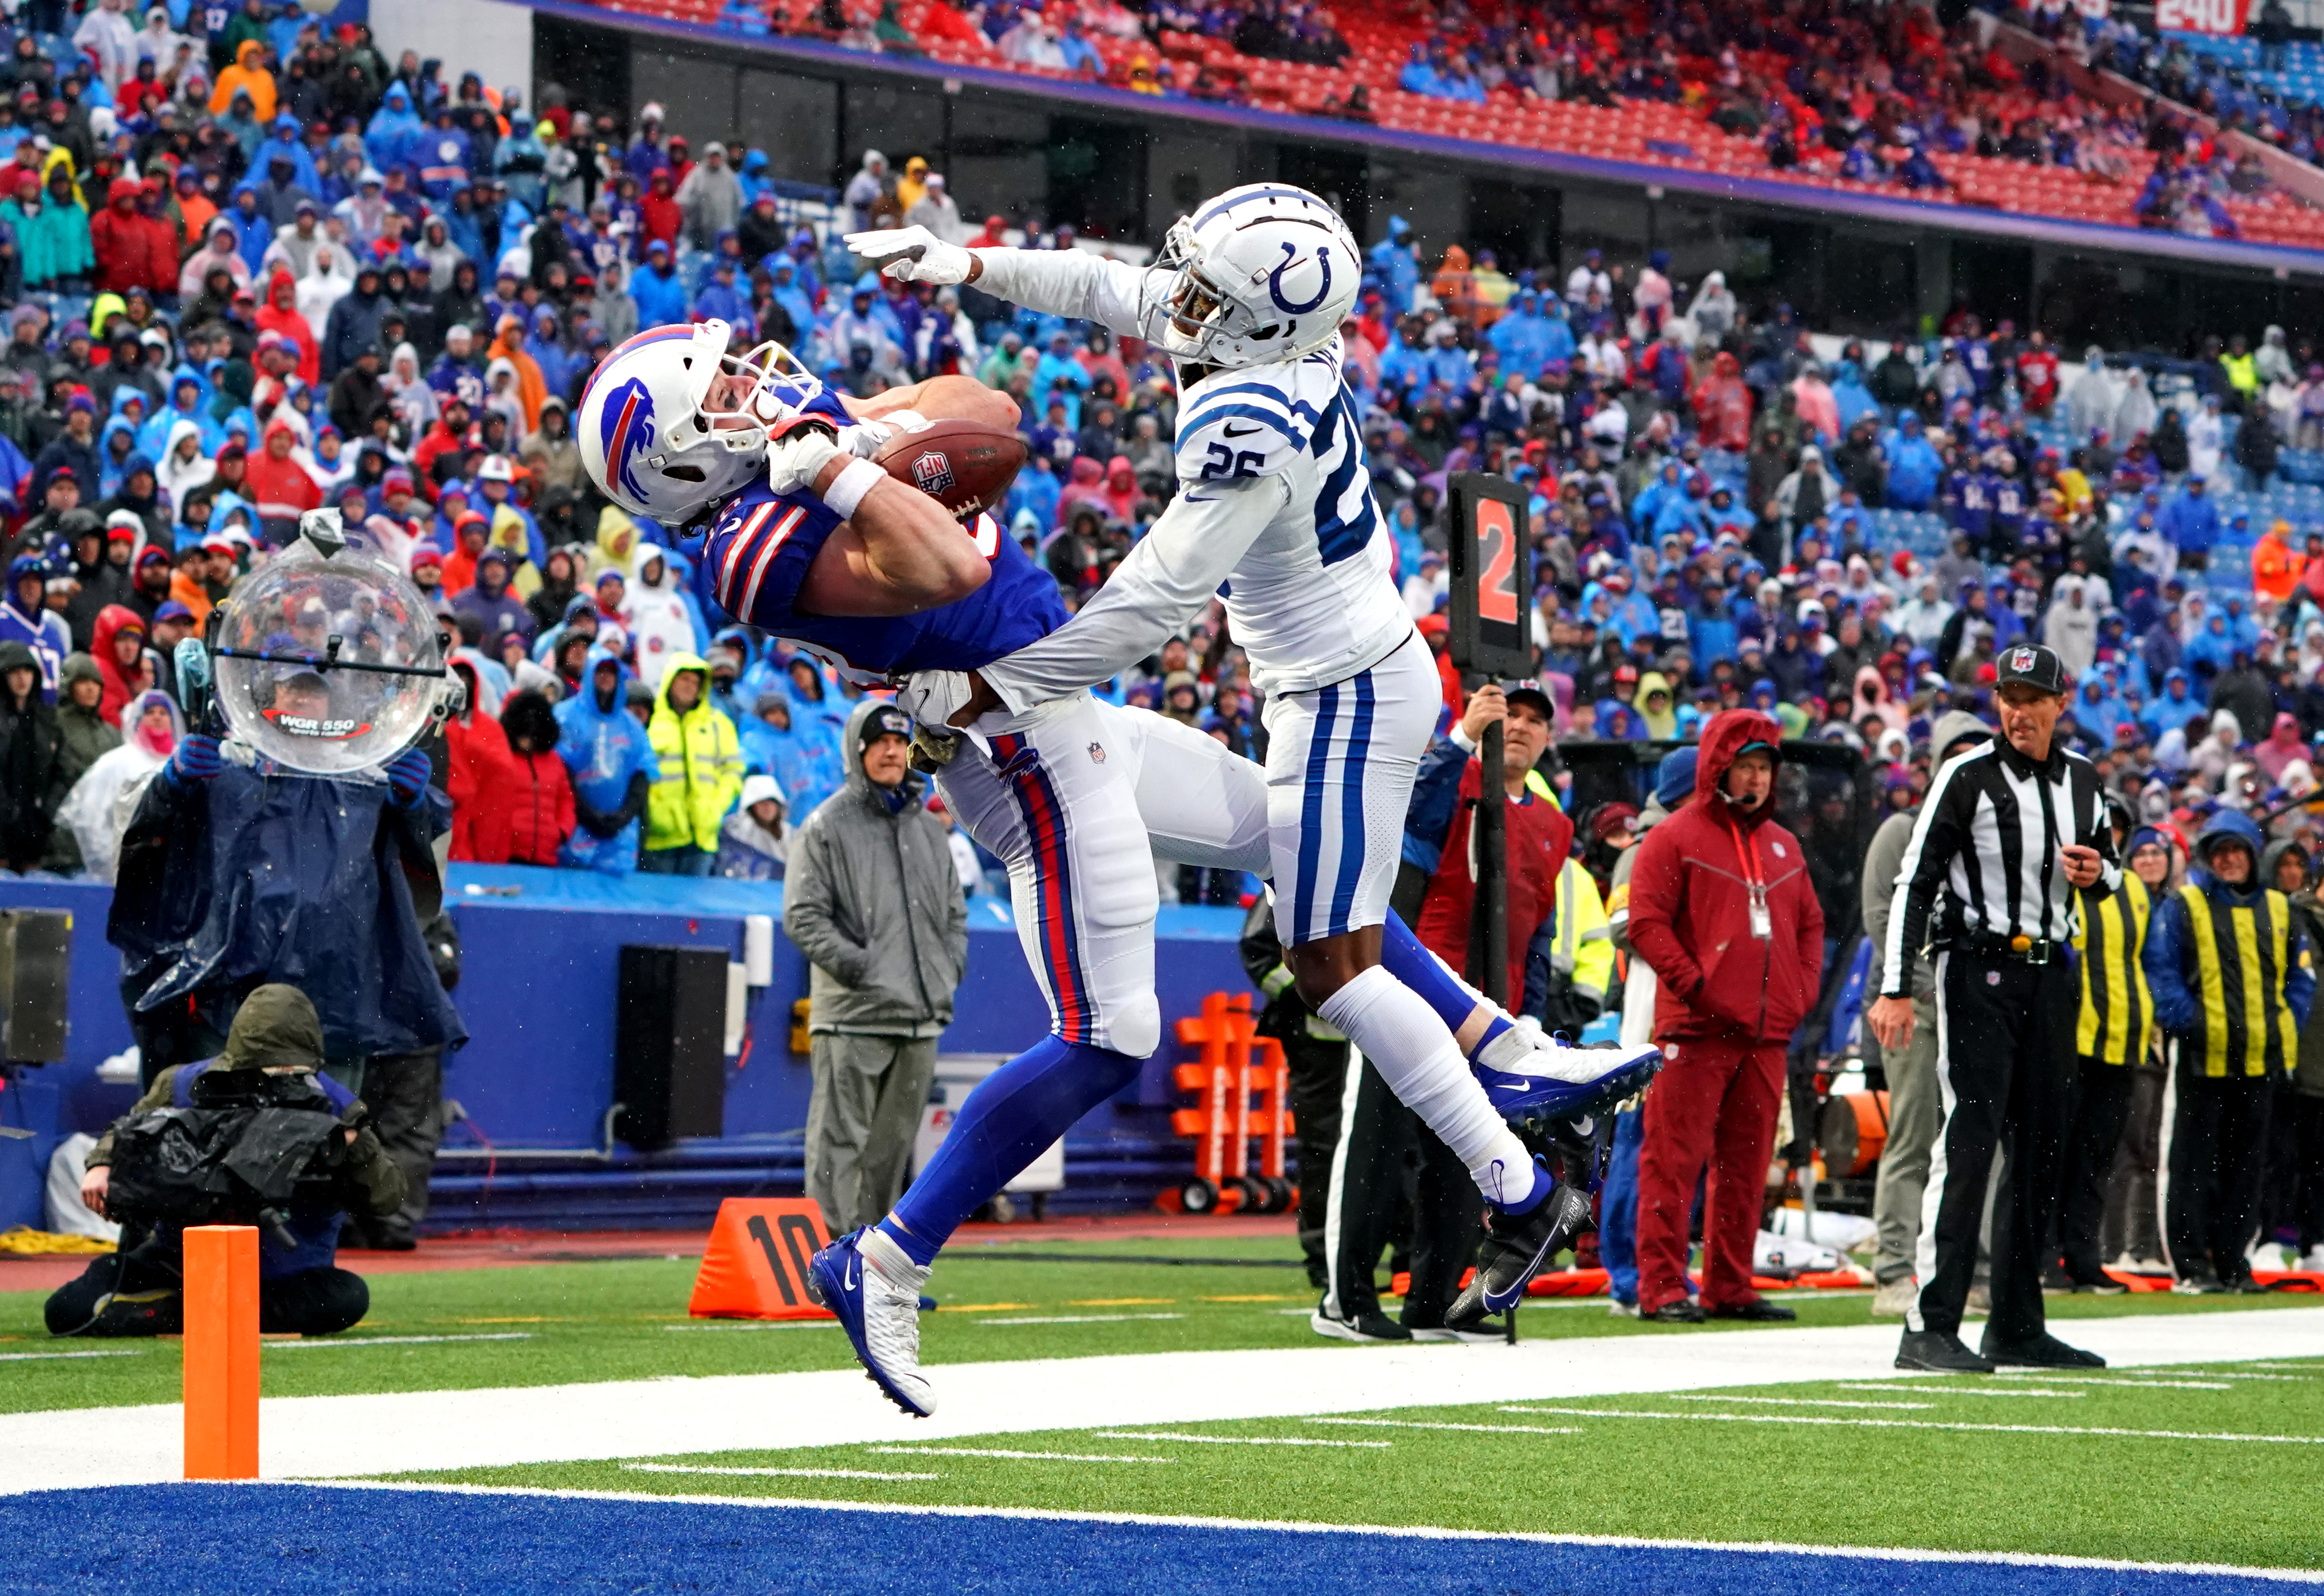 Dawson Knox #88 of the Buffalo Bills attempts to catch a pass that is broken up by Rock Ya-Sin #26 of the Indianapolis Colts during the fourth quarter at Highmark Stadium on November 21, 2021 in Orchard Park, New York.